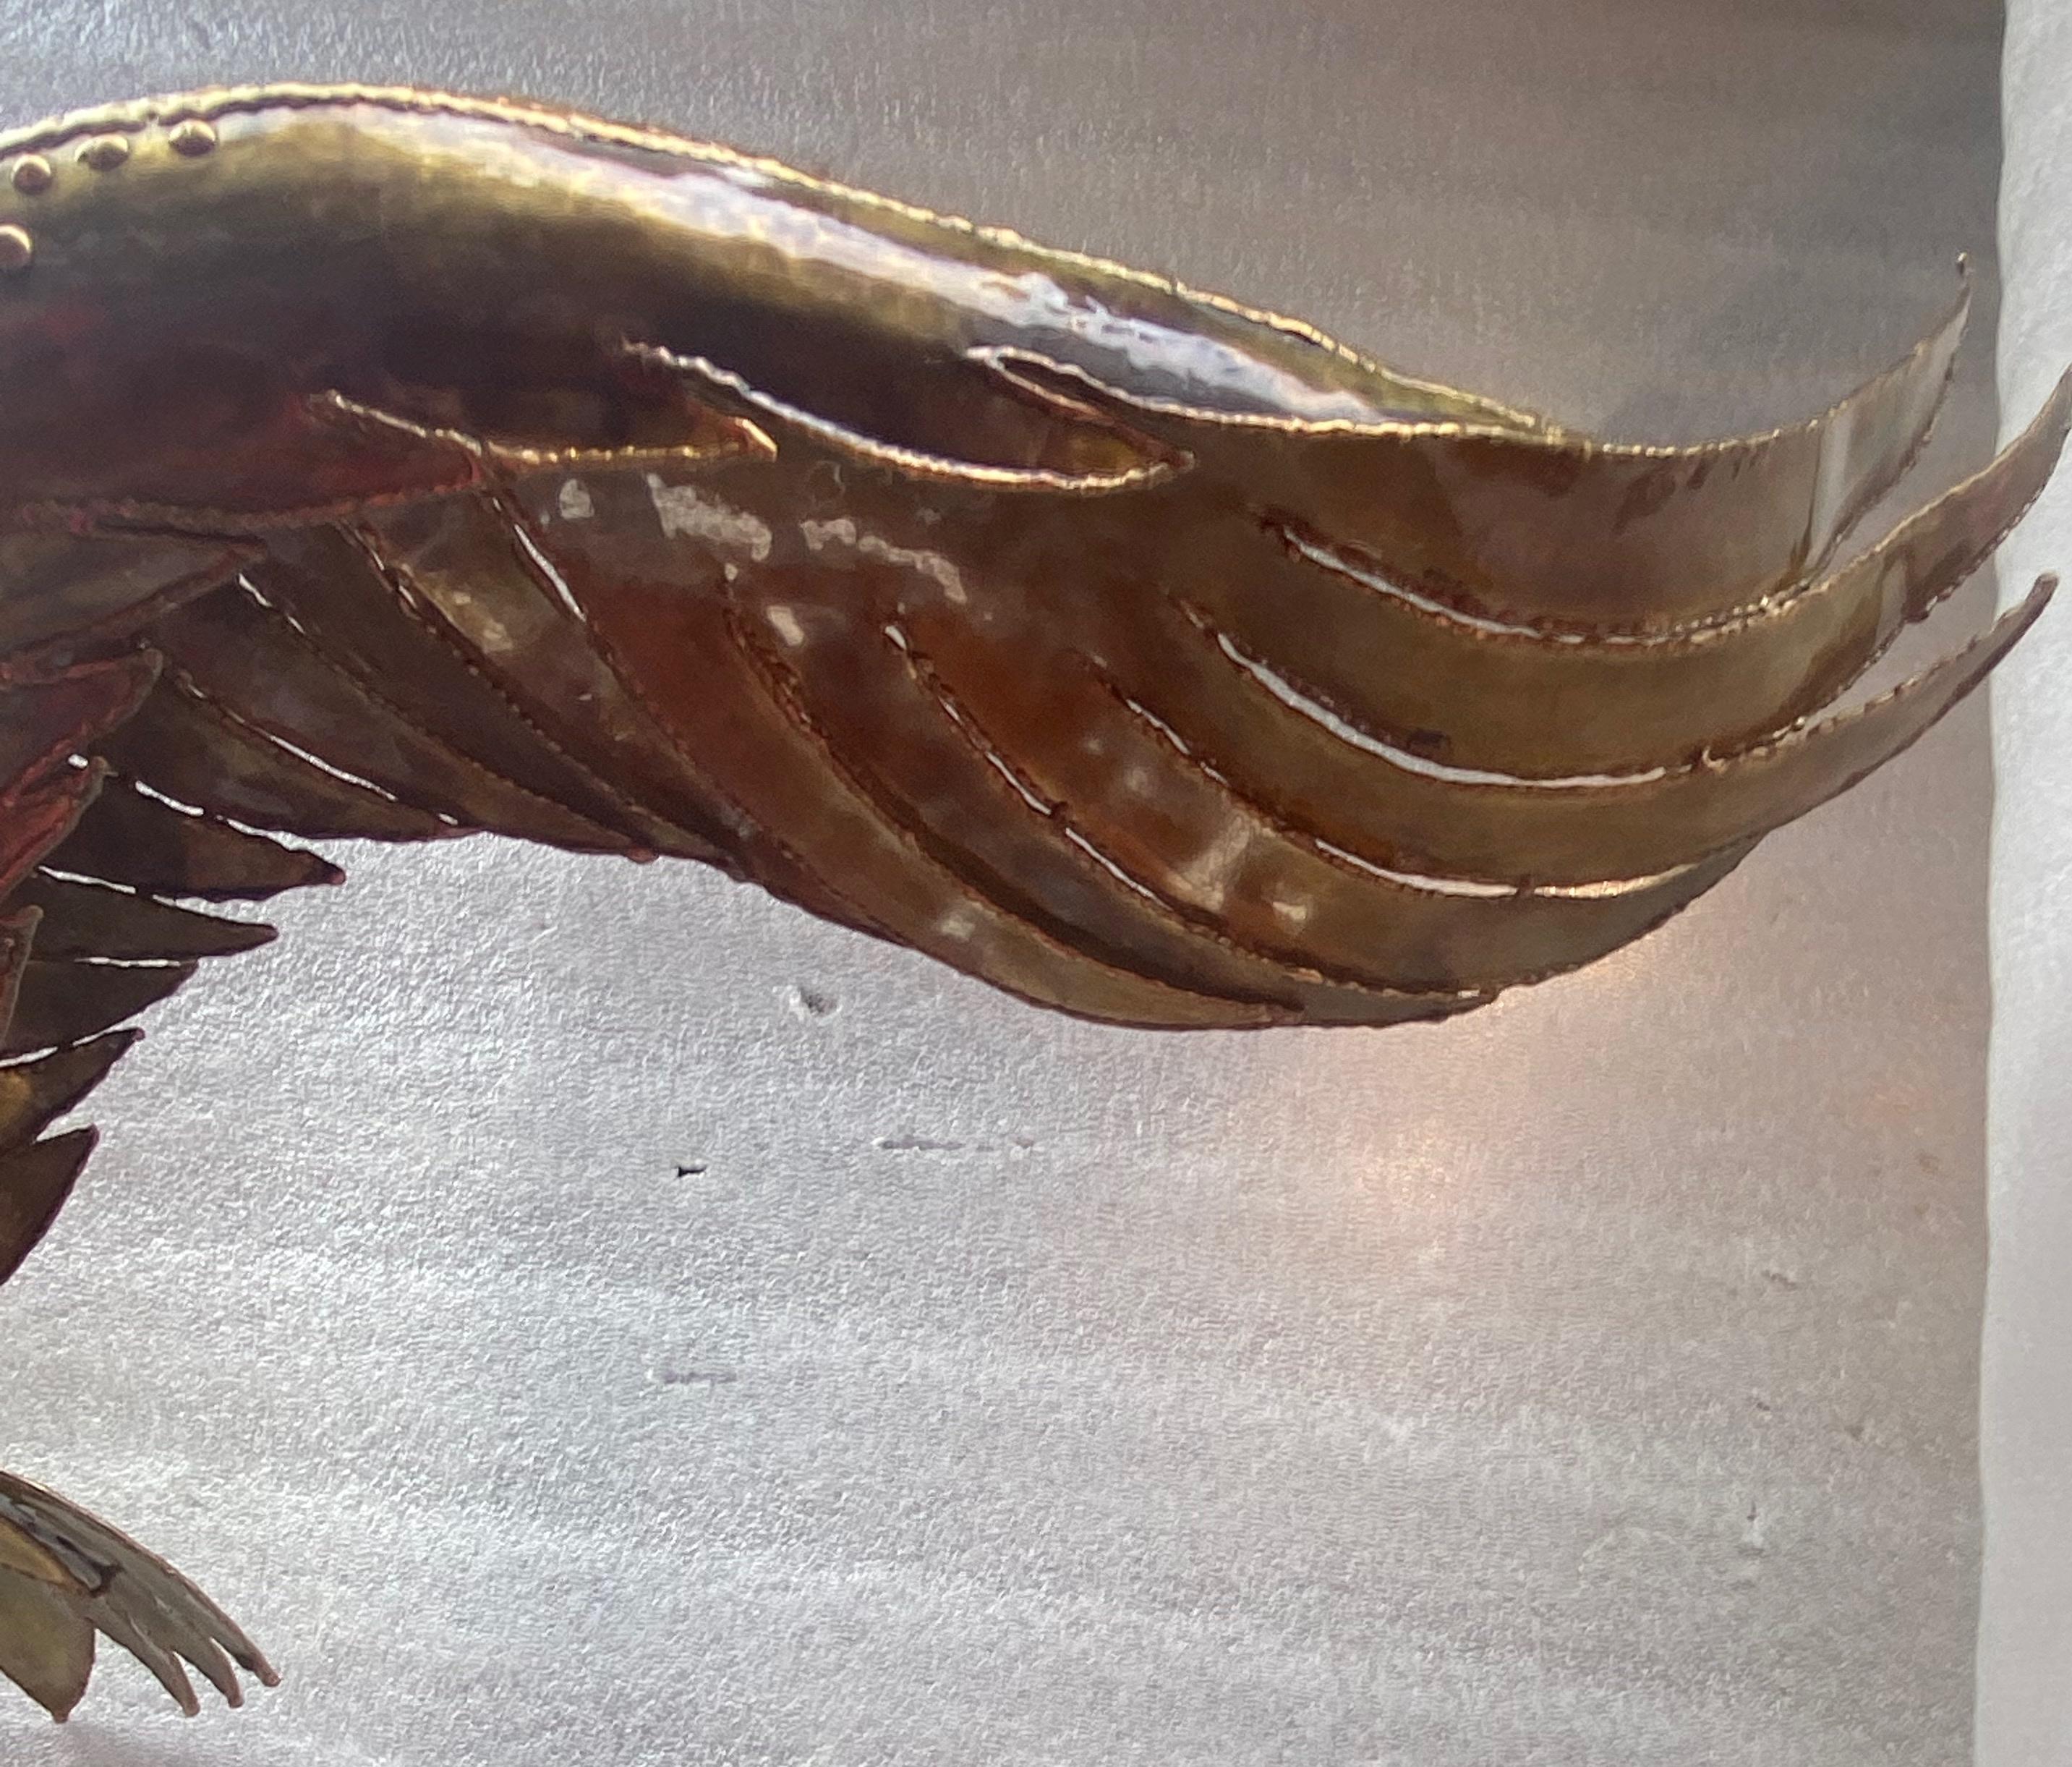 Brass and amethyst sculpture; depicting an eagle with spread wings placed on a nest enclosing a large amethyst geode. Circa 1970.
Width: 107cm
Height: 80cm
Depth: 43cm
Piece of command only one.